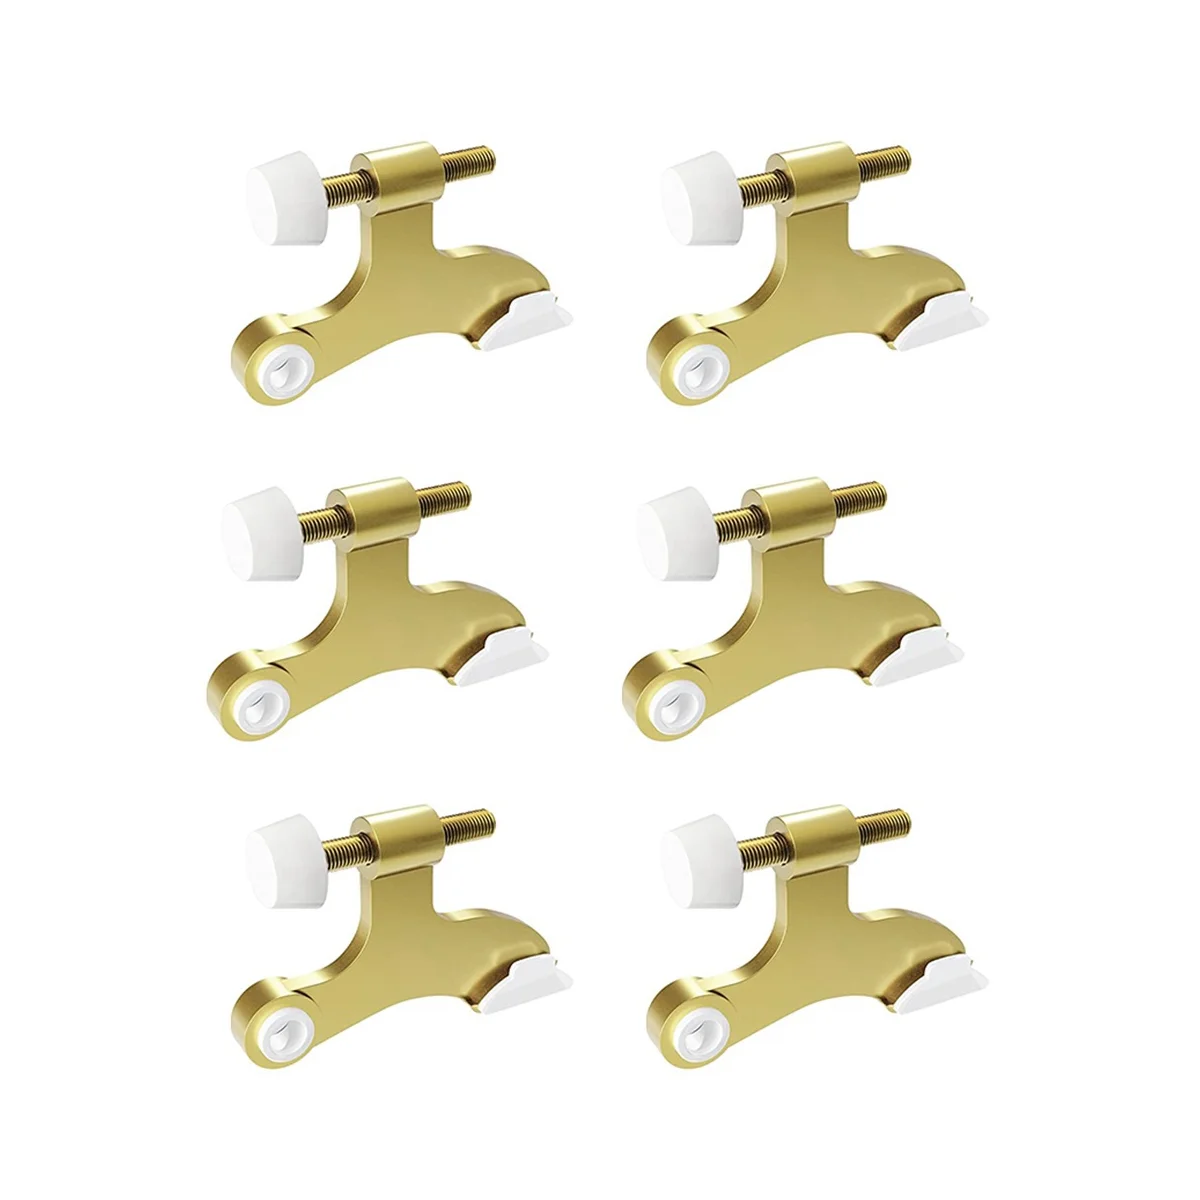 

6Pcs Hinge Pin Gold Door Stopper Adjustable Heavy Duty Hinge with Rubber Bumper To Reduce Potential Damage Wall Dents